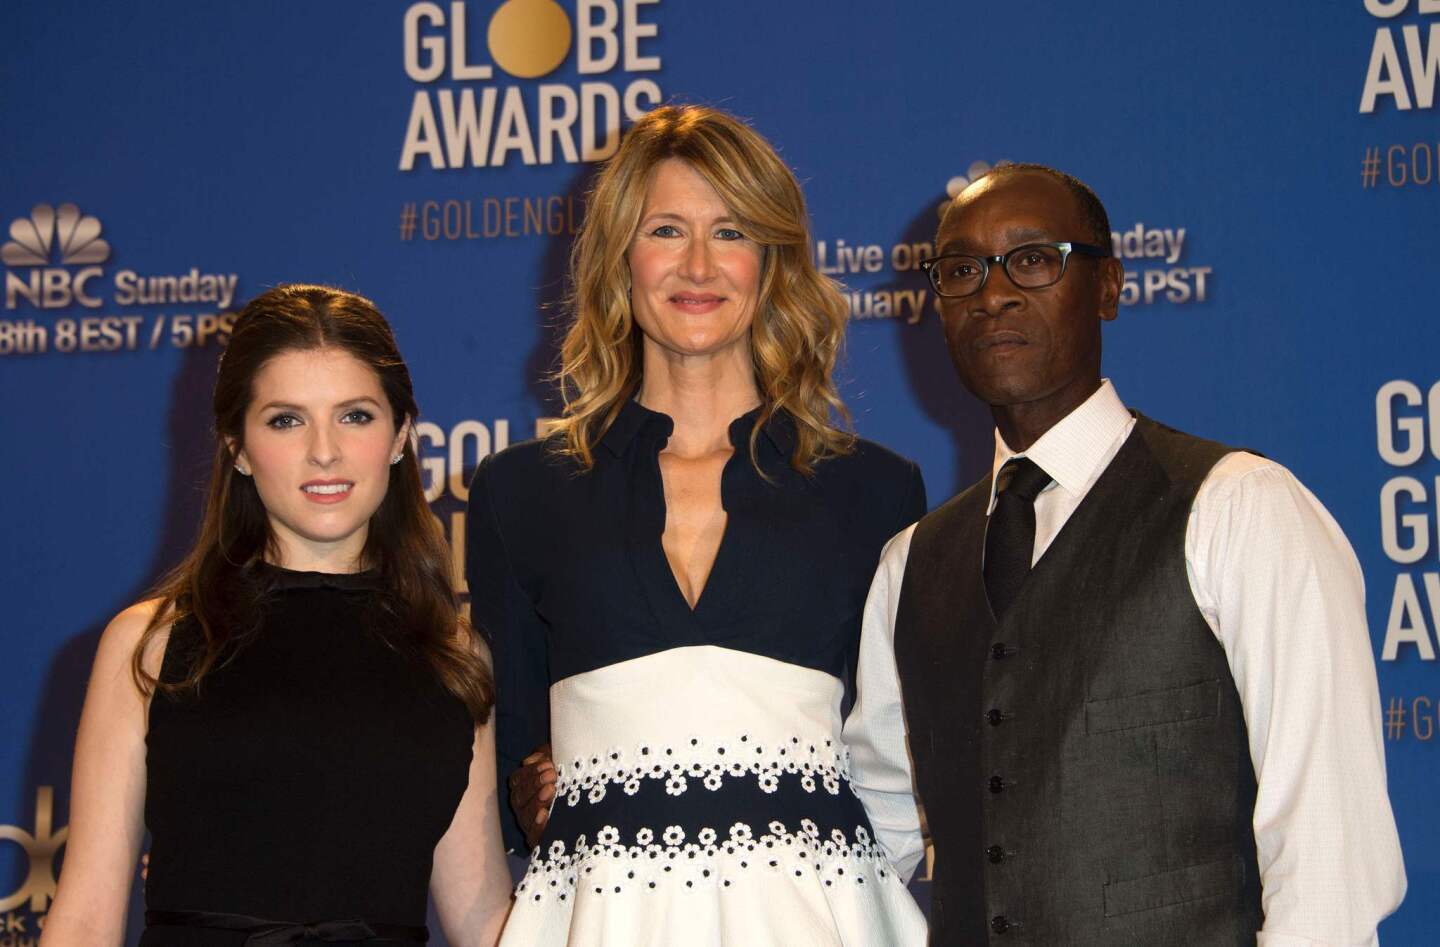 Actors Anna Kendrick, left, Laura Dern and Don Cheadle announced the 74th Golden Globe Award nominations at the Beverly Hilton Hotel on Monday.